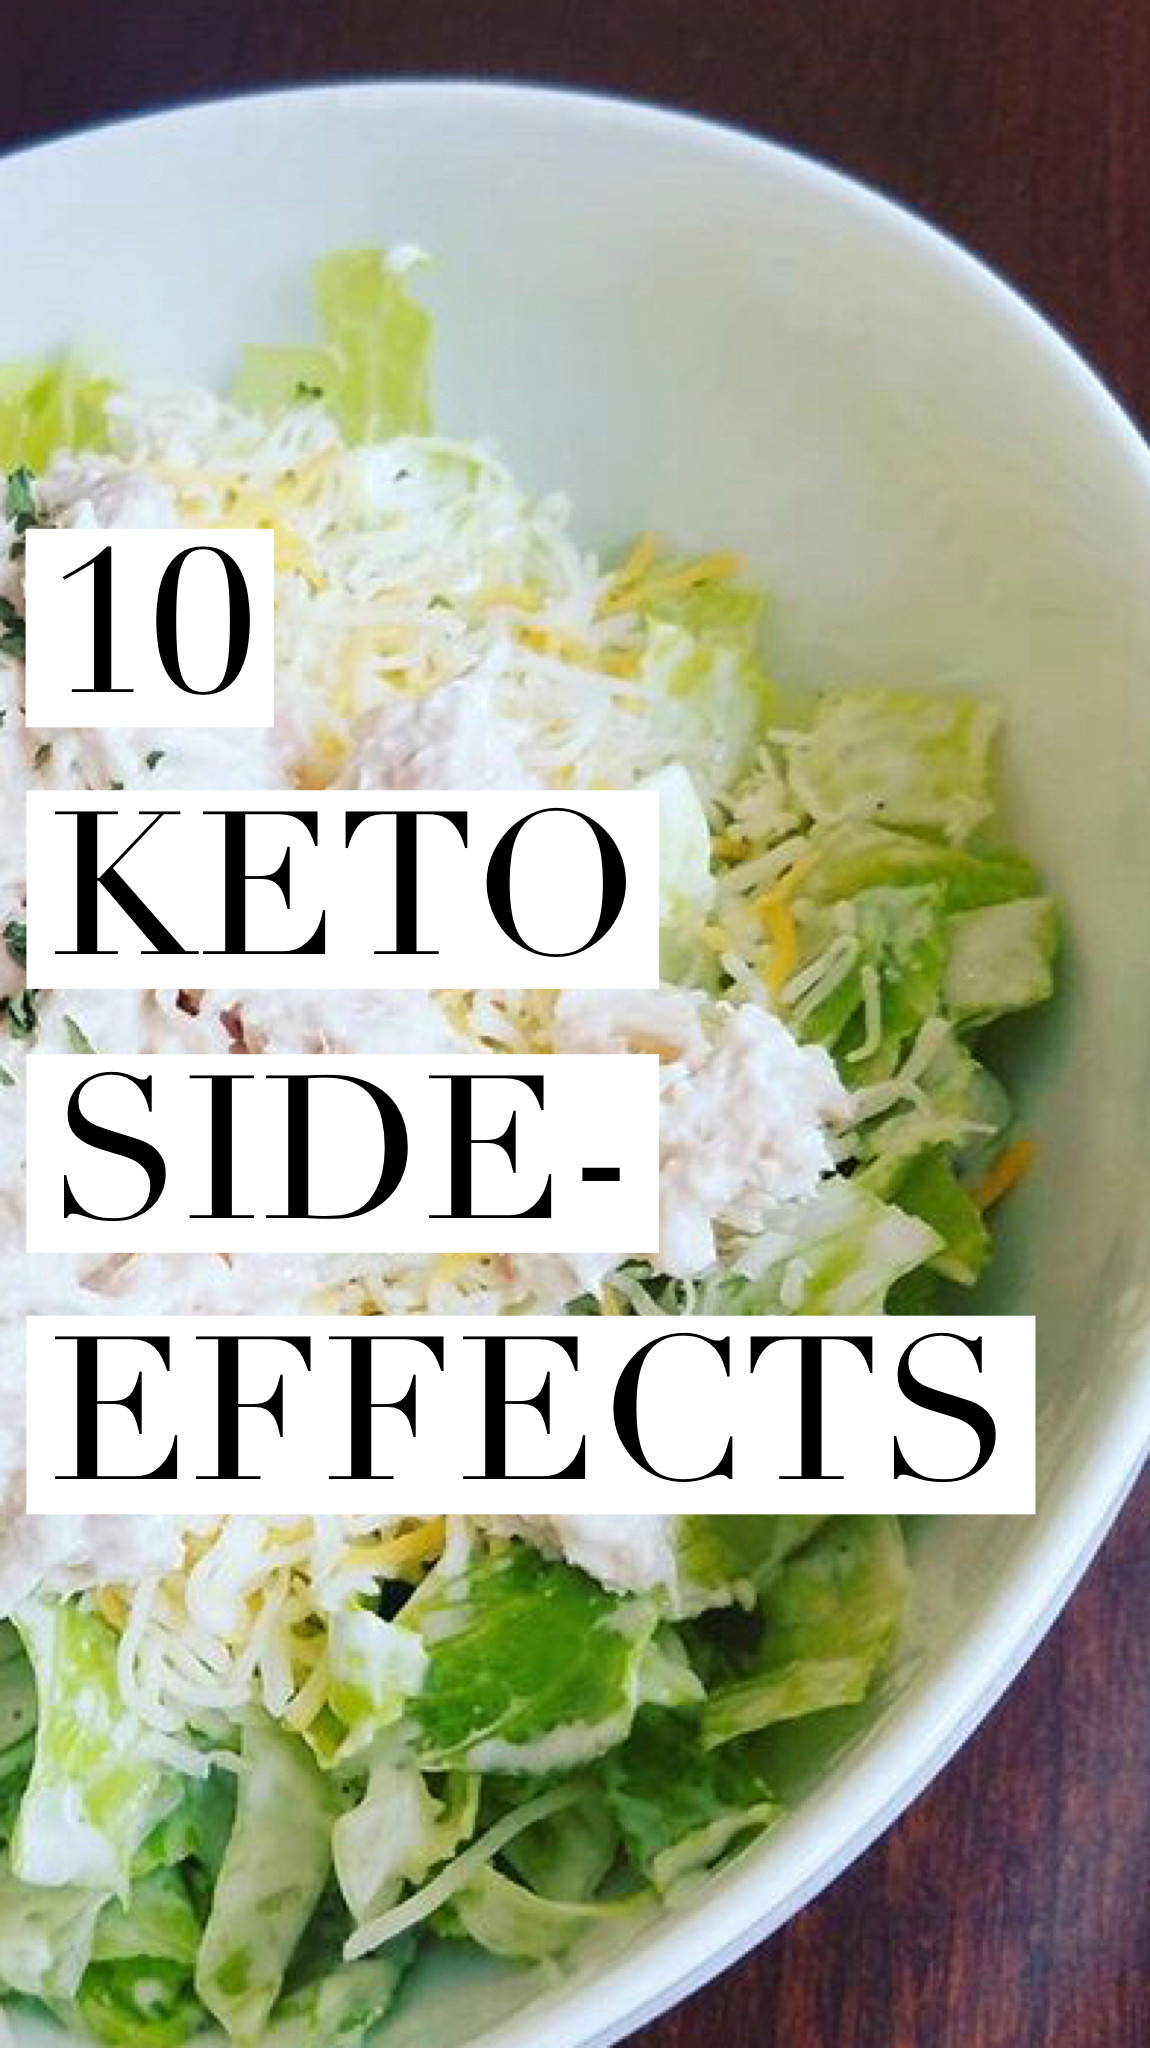 Paleo Diet Side Effects
 Top 10 Most mon Keto Side Effects and Reme s This